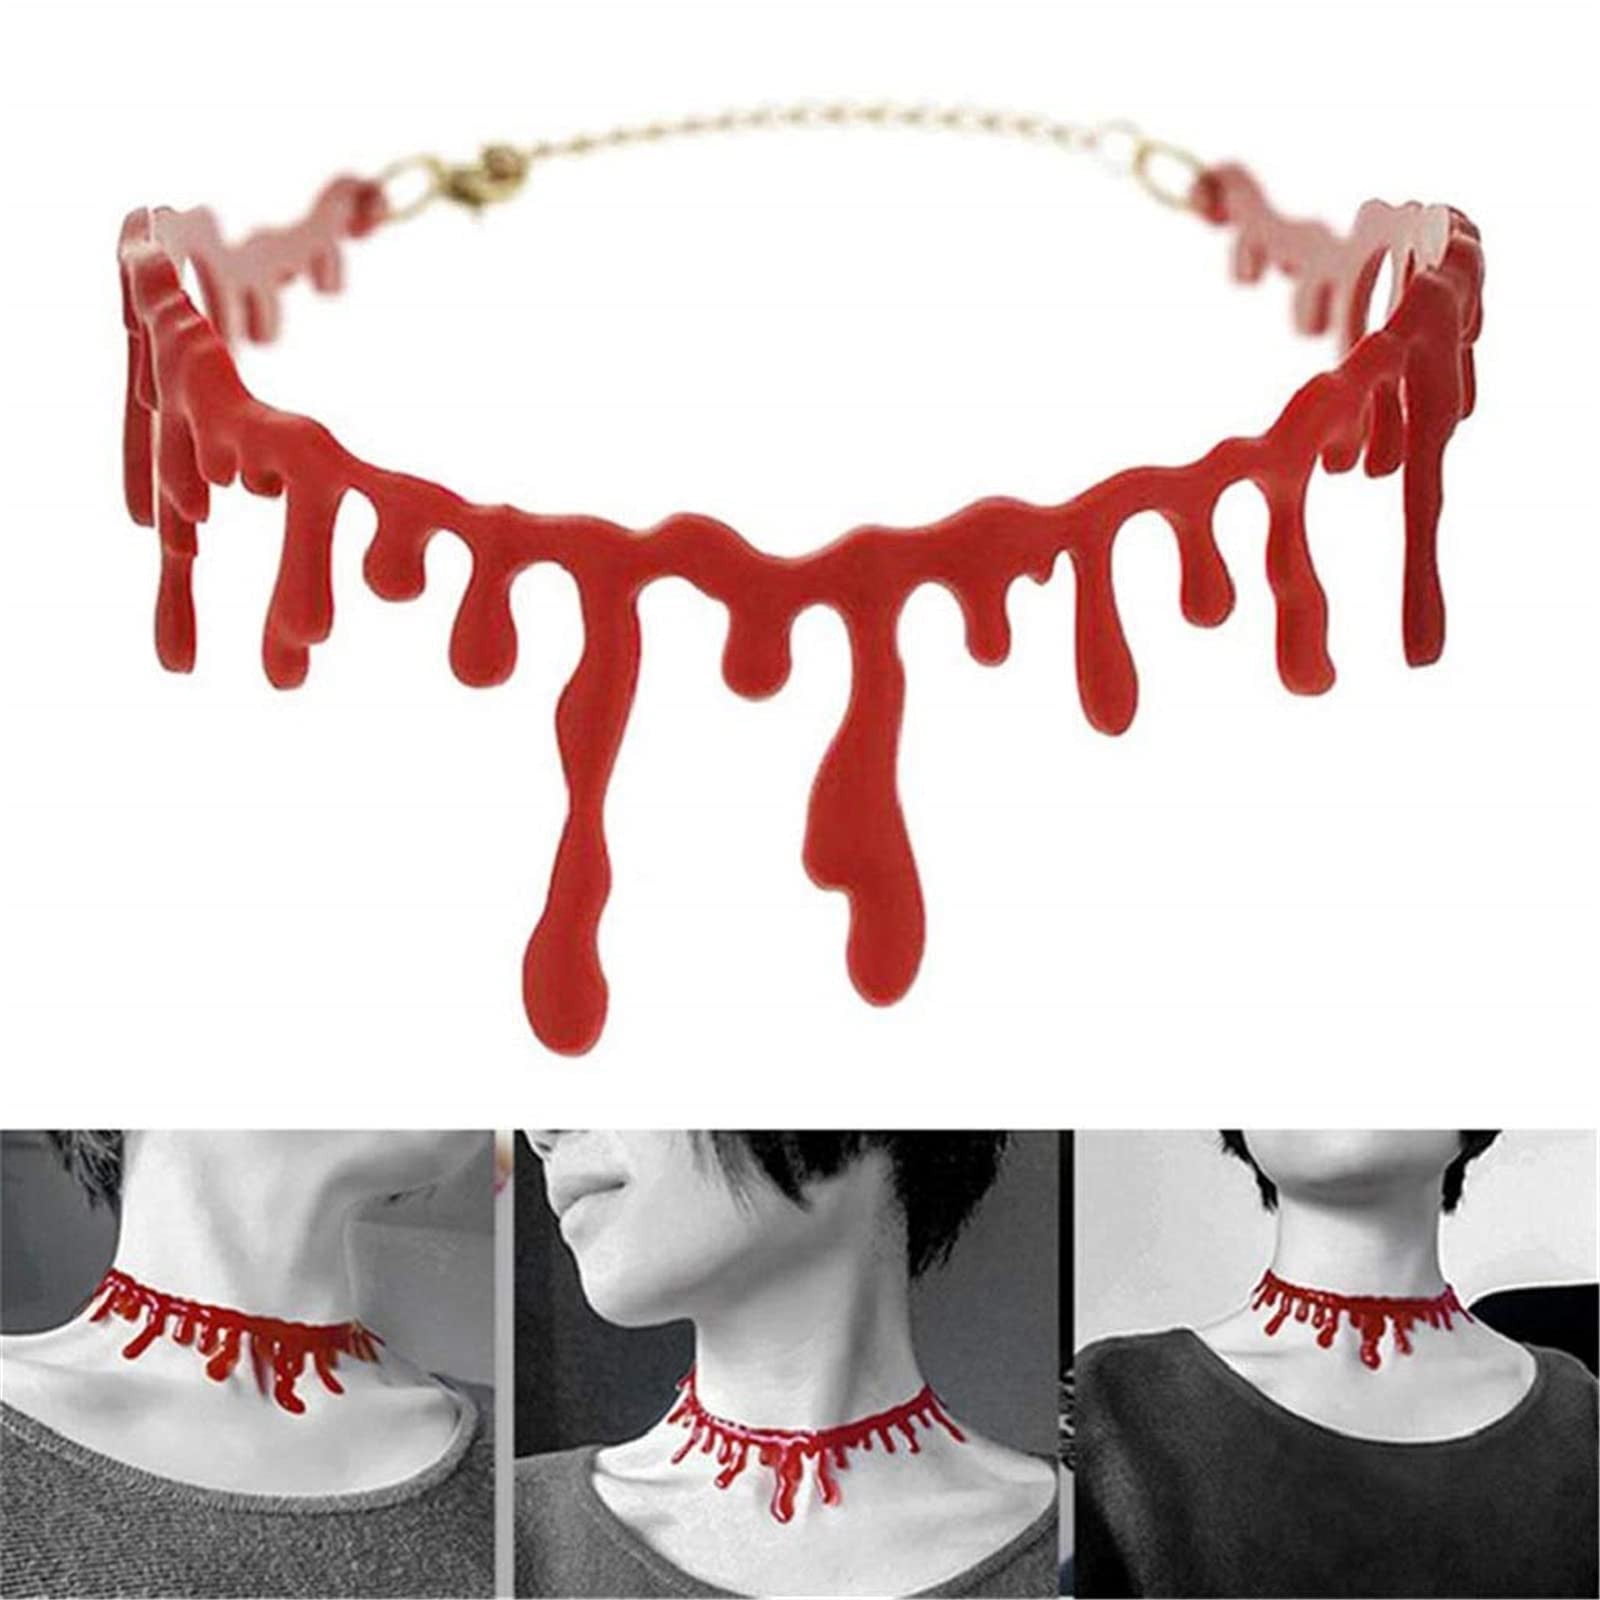 GOTHIC LOOK BLOOD RED CHOKER flexible/adjustable.Great Gift.Spicy and devilish!